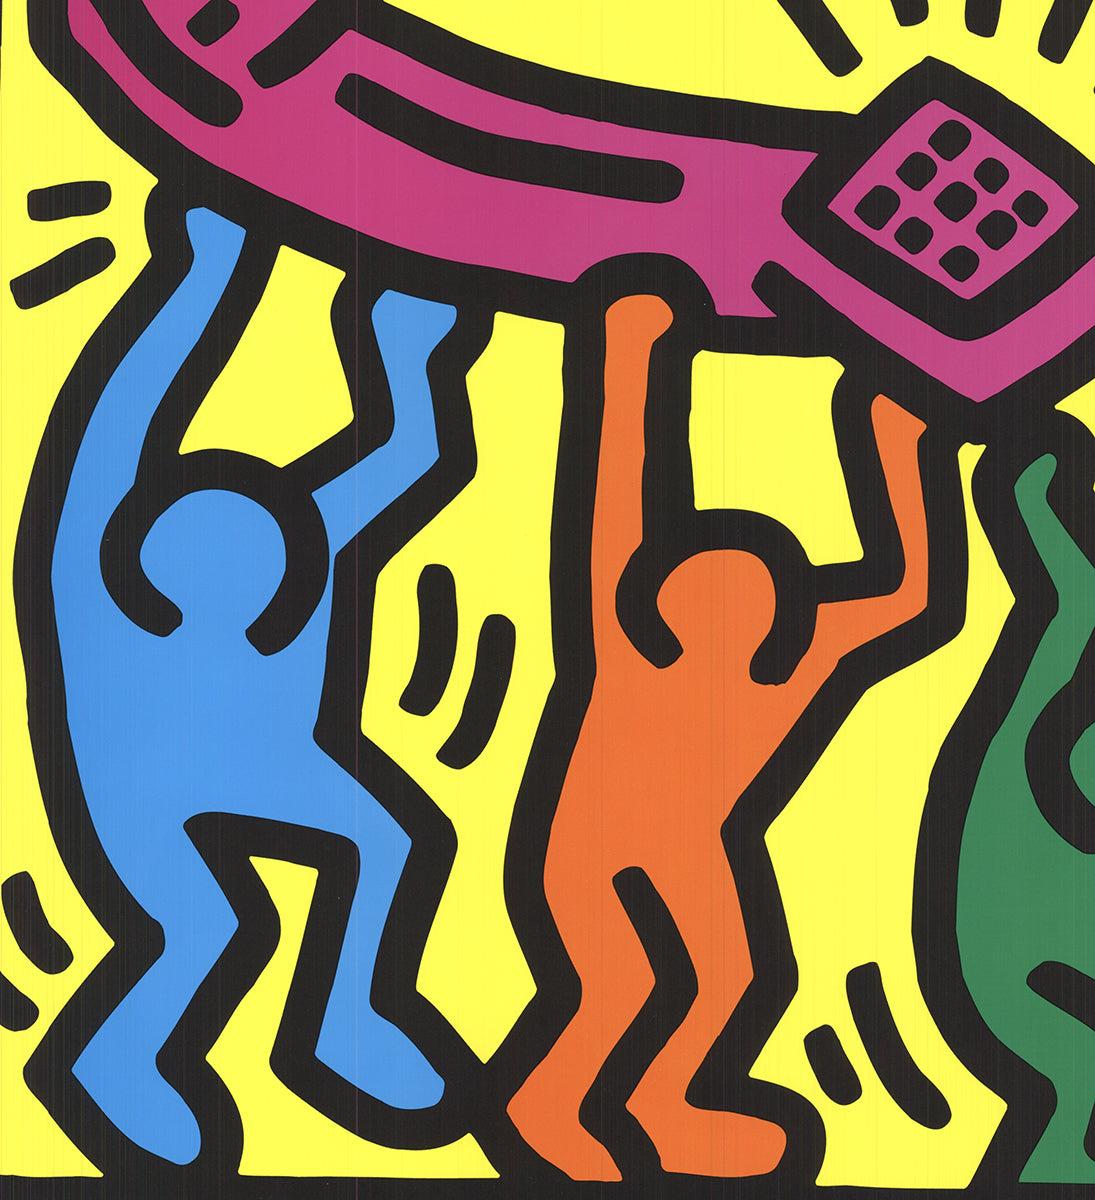 Keith Haring 'Untitled, 1989' 2008- Lithographie offset en vente 2